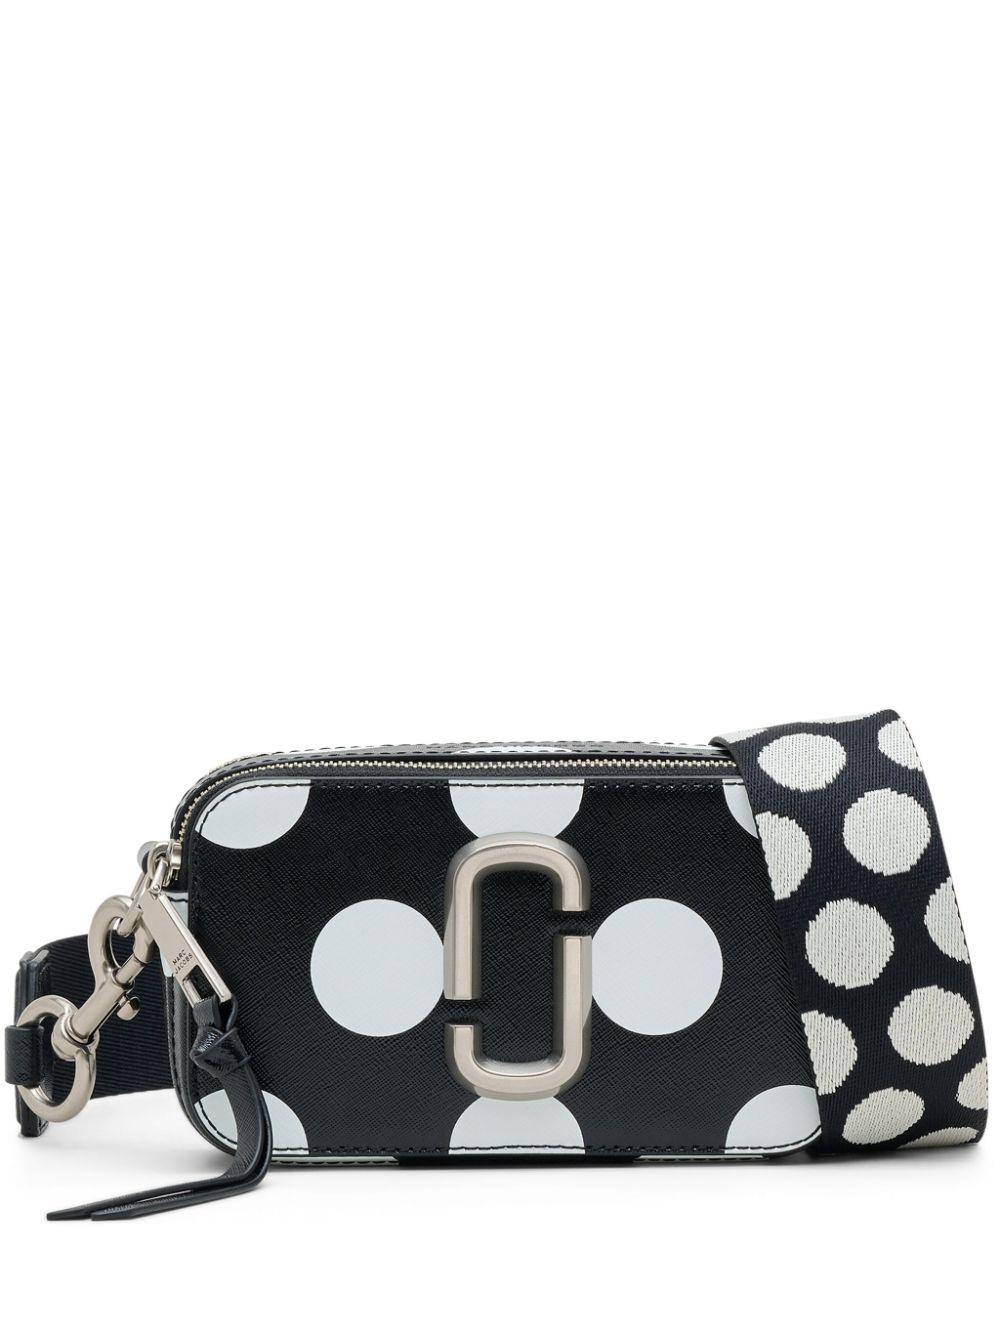 Marc Jacobs The Dot Snapshot Bag in Pink